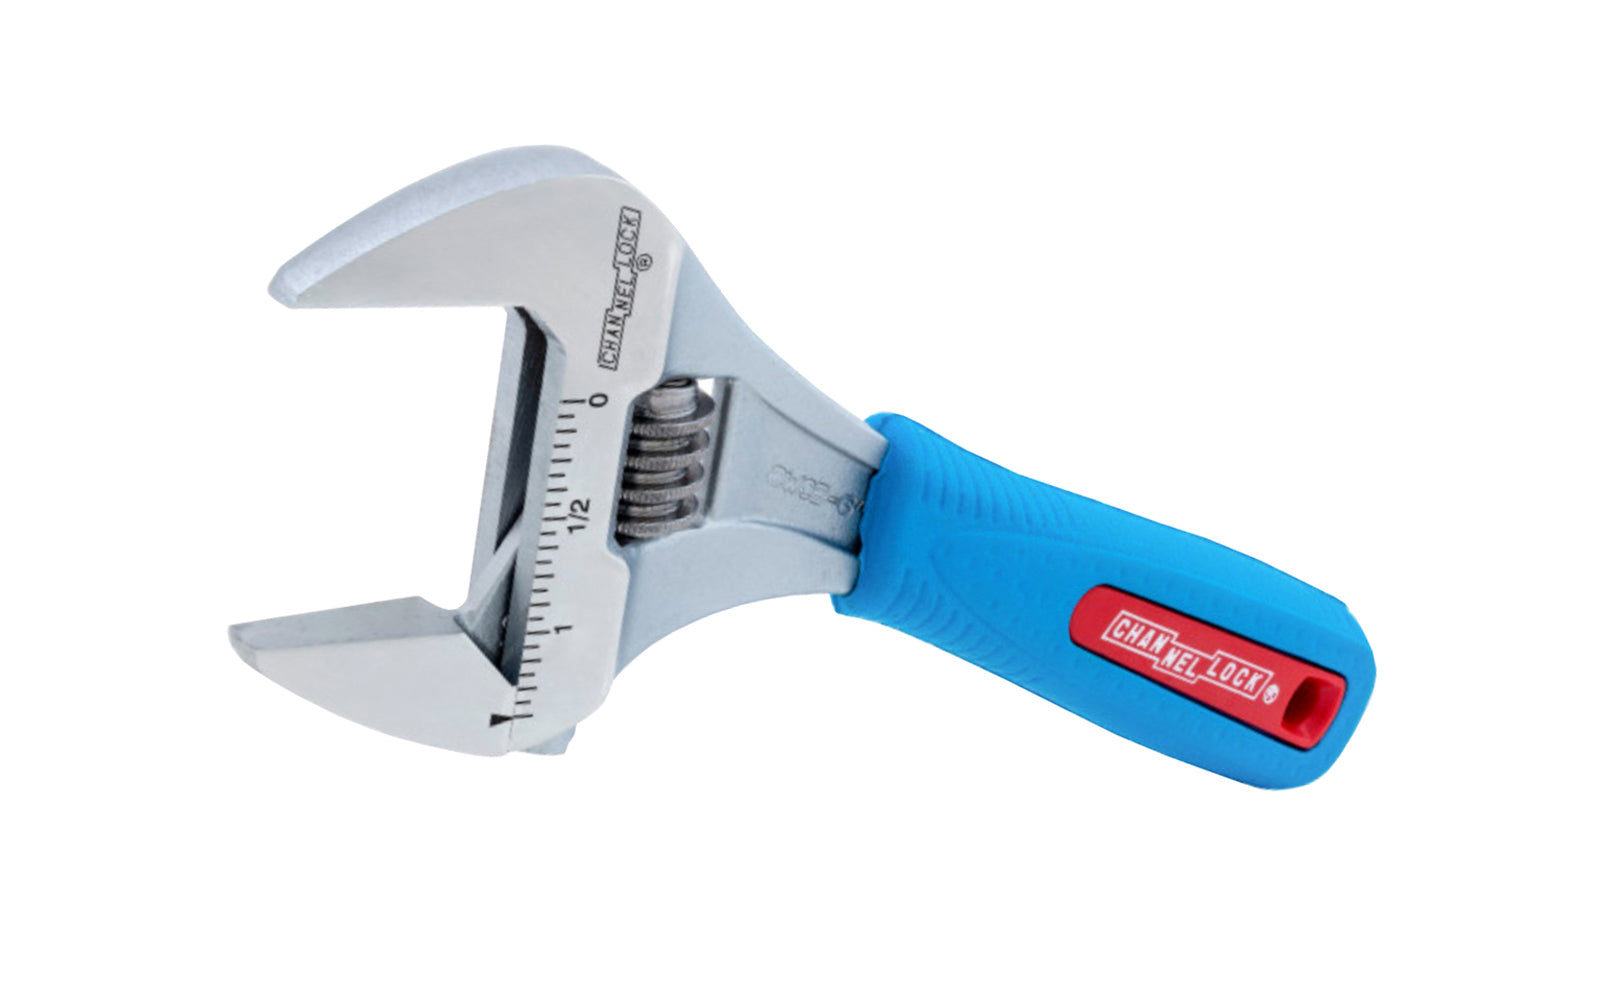 Channellock 6" Adjustable Wrench "Wide Azz" 'Code Blue". WideAzz jaws are up to 75% wider than a standard wrench. Longer jaws grip better and provide greater access in tight spaces. Rugged Chrome Vanadium steel. Chrome finish for rust prevention. 6" size. Channelock Model 6WCB.